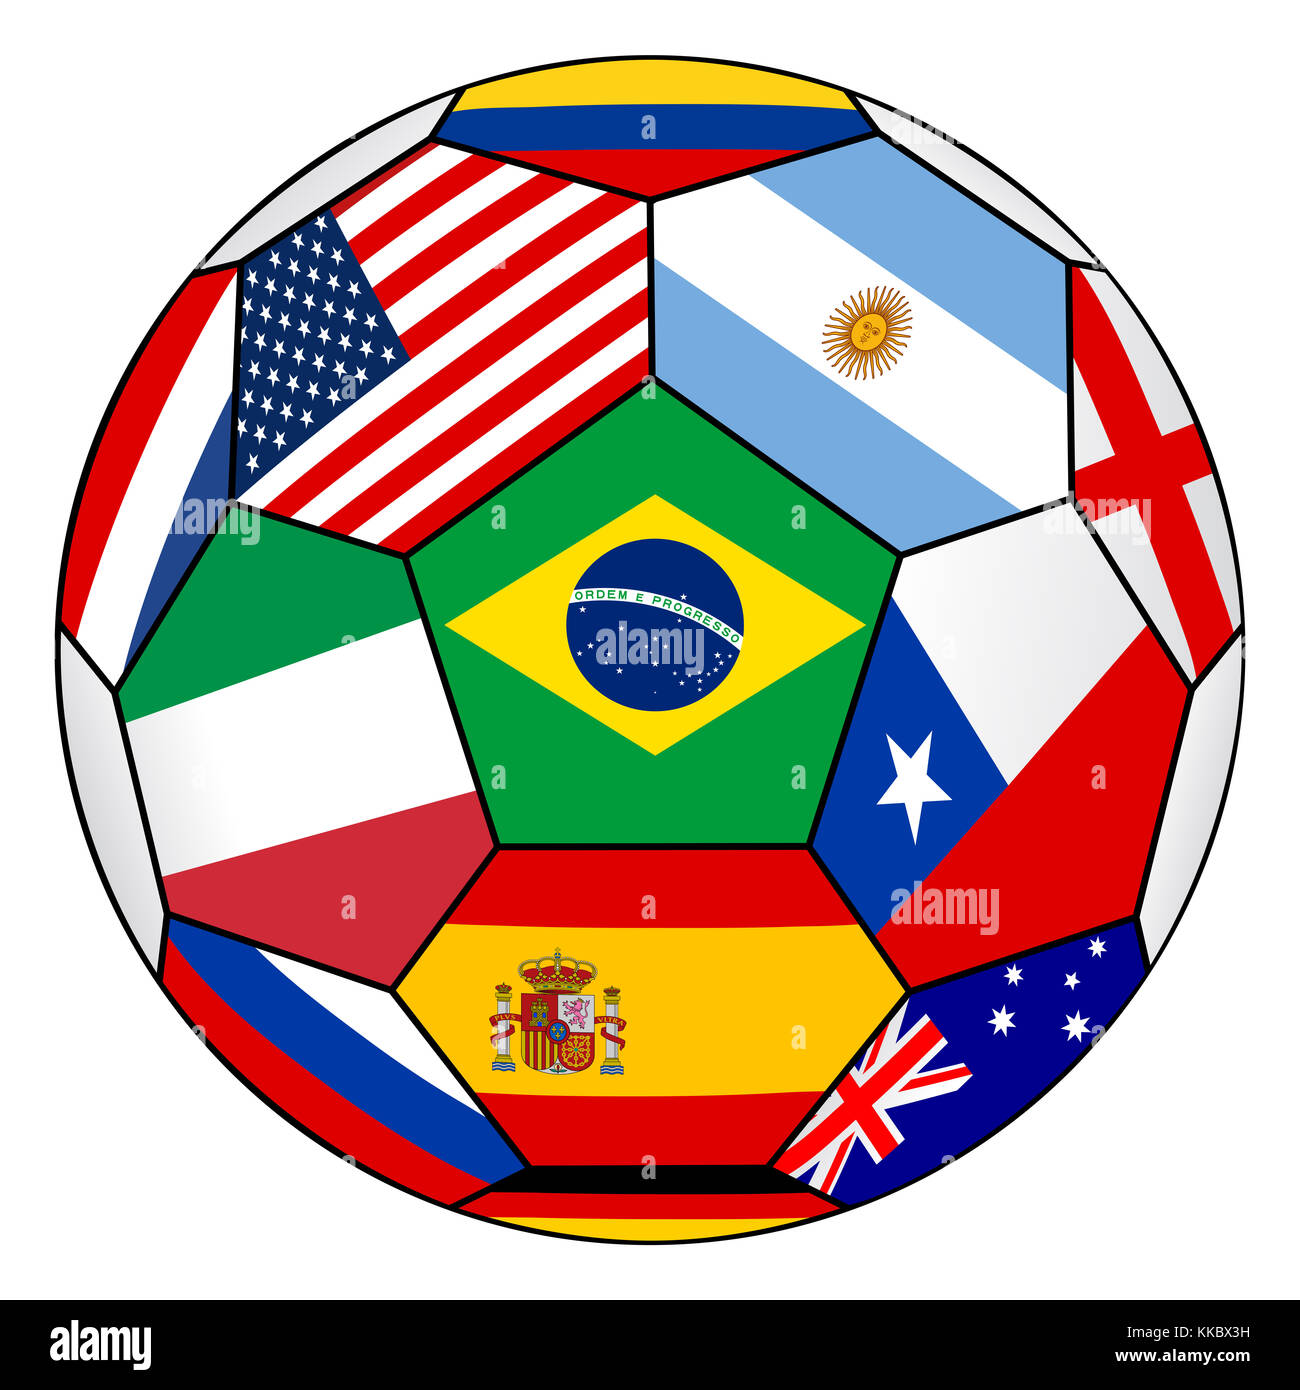 Football ball with various flags Stock Photo